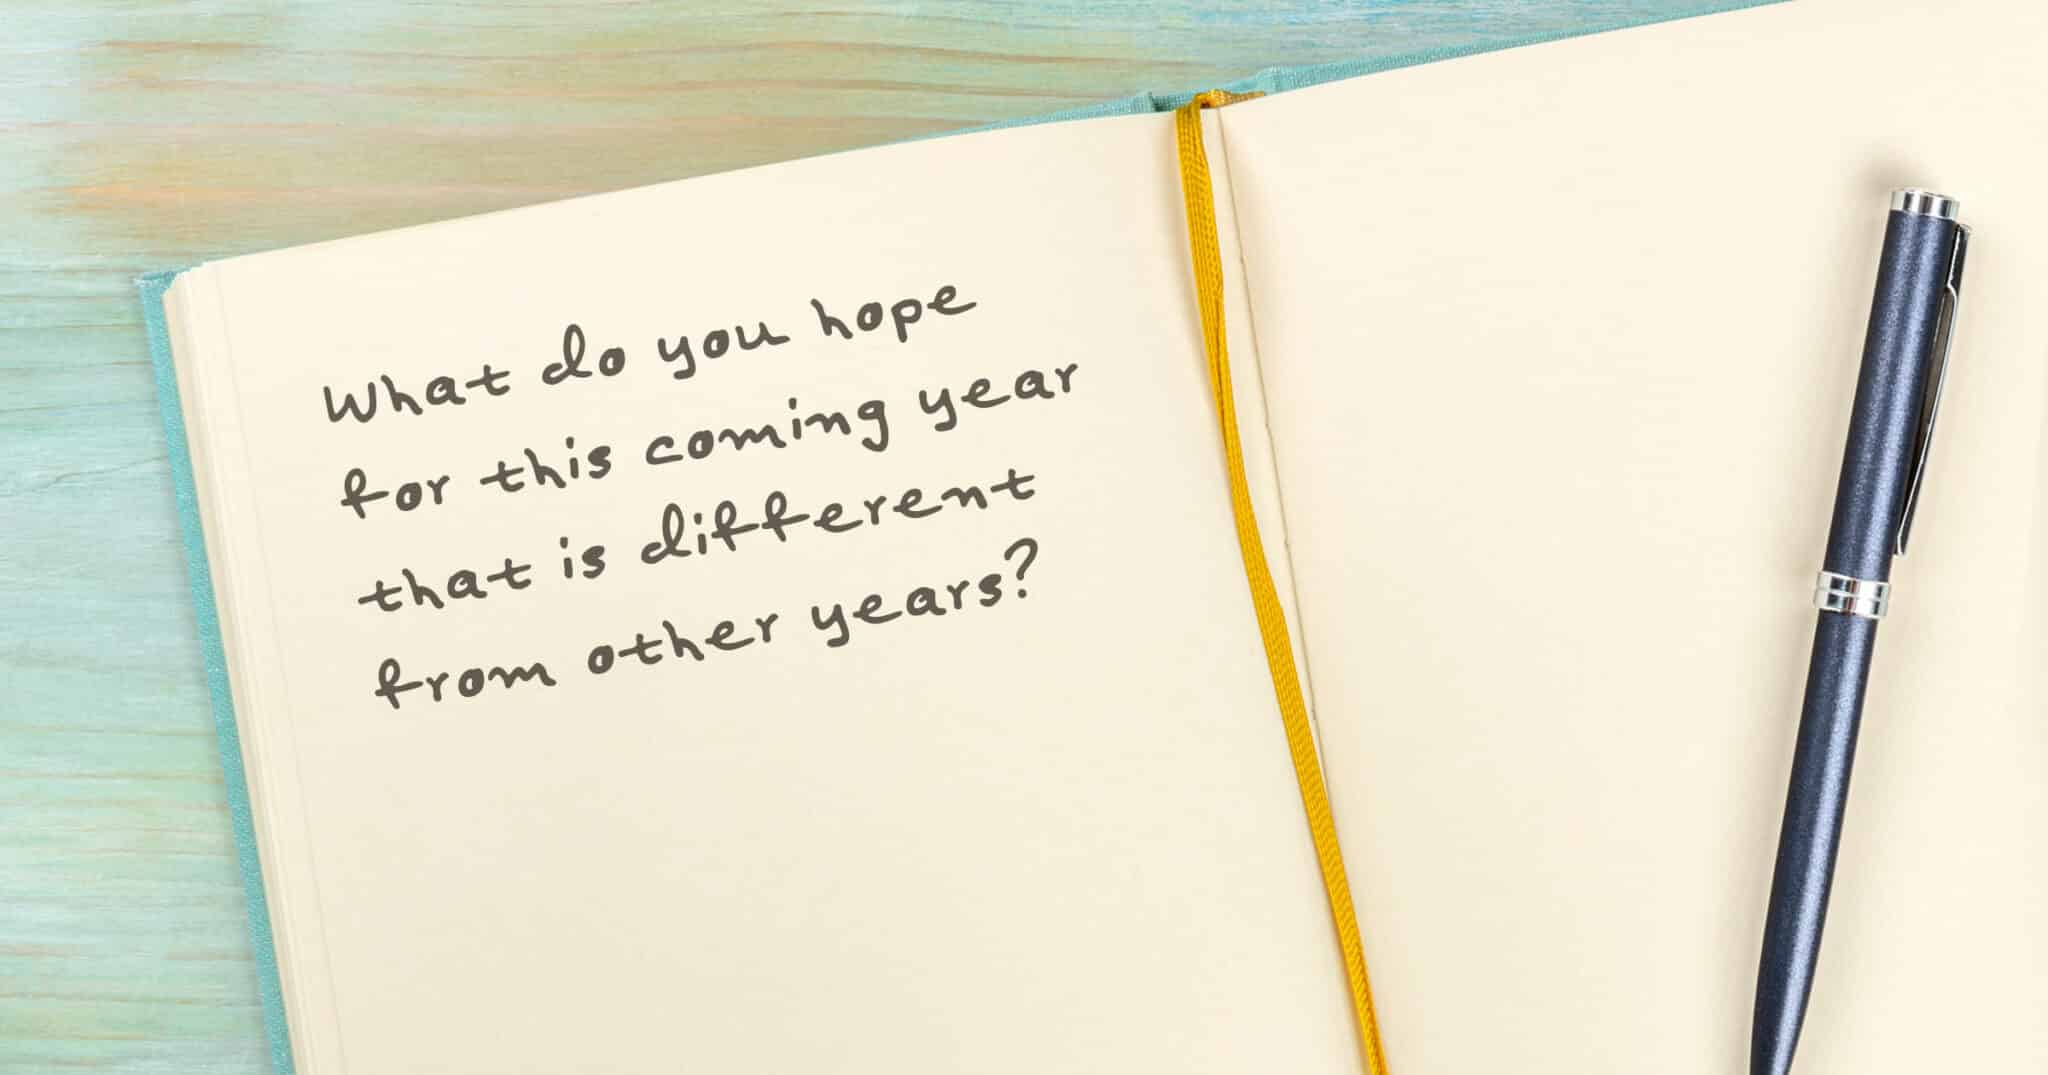 Journal with written prompt: What do you hope for this coming year that is different from other years?